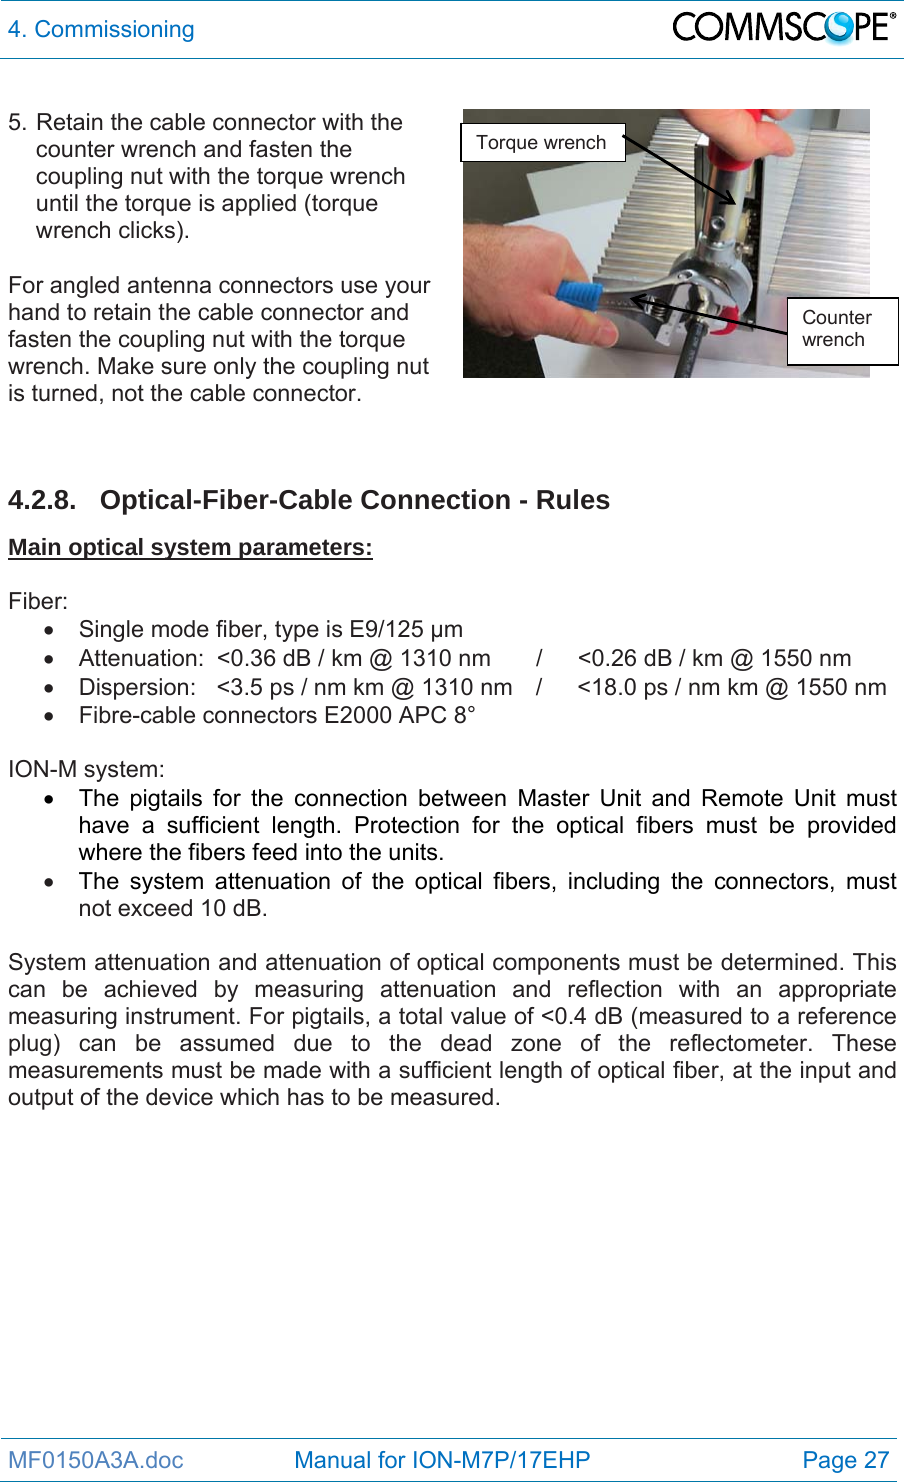 4. Commissioning  MF0150A3A.doc                 Manual for ION-M7P/17EHP  Page 27  5. Retain the cable connector with the counter wrench and fasten the coupling nut with the torque wrench until the torque is applied (torque wrench clicks).  For angled antenna connectors use your hand to retain the cable connector and fasten the coupling nut with the torque wrench. Make sure only the coupling nut is turned, not the cable connector.     4.2.8. Optical-Fiber-Cable Connection - Rules Main optical system parameters:  Fiber:   Single mode fiber, type is E9/125 µm   Attenuation:  &lt;0.36 dB / km @ 1310 nm  /  &lt;0.26 dB / km @ 1550 nm   Dispersion:  &lt;3.5 ps / nm km @ 1310 nm  /  &lt;18.0 ps / nm km @ 1550 nm   Fibre-cable connectors E2000 APC 8°  ION-M system:   The pigtails for the connection between Master Unit and Remote Unit must have a sufficient length. Protection for the optical fibers must be provided where the fibers feed into the units.   The system attenuation of the optical fibers, including the connectors, must not exceed 10 dB.  System attenuation and attenuation of optical components must be determined. This can be achieved by measuring attenuation and reflection with an appropriate measuring instrument. For pigtails, a total value of &lt;0.4 dB (measured to a reference plug) can be assumed due to the dead zone of the reflectometer. These measurements must be made with a sufficient length of optical fiber, at the input and output of the device which has to be measured.  Torque wrench Counter wrench 